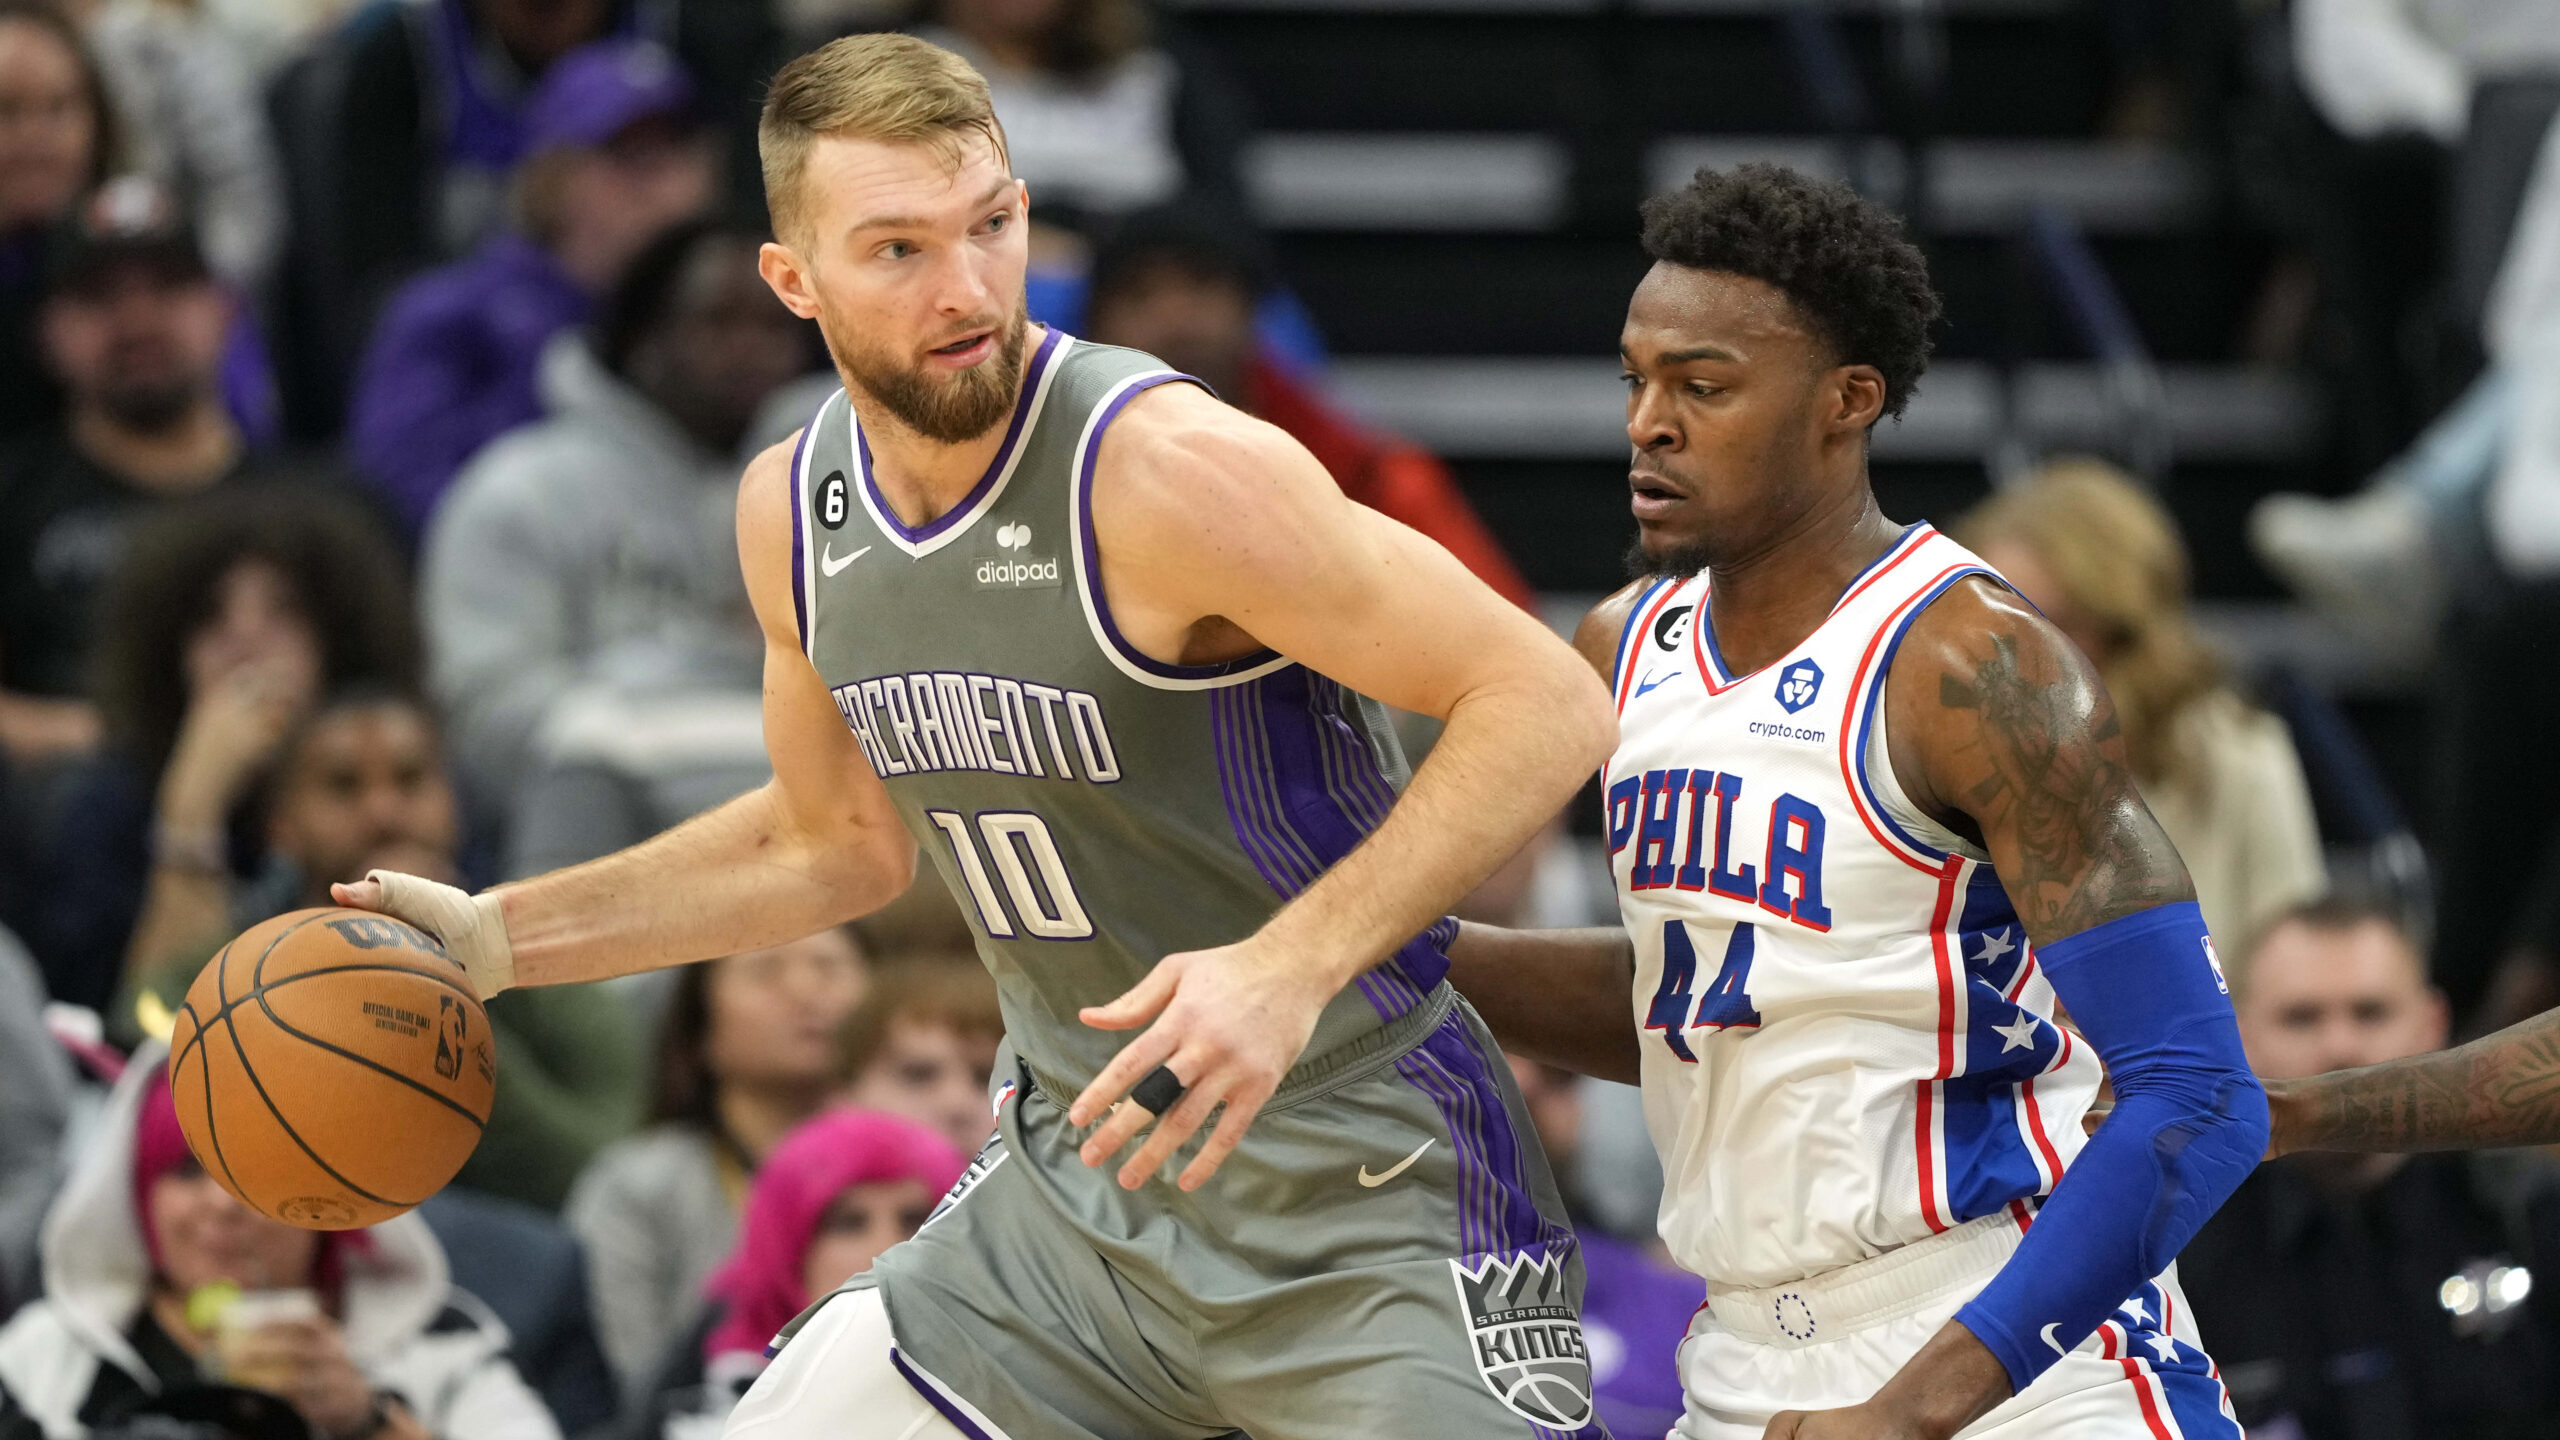 Sabonis and Harris are Top Props in Kings-76ers Matchup